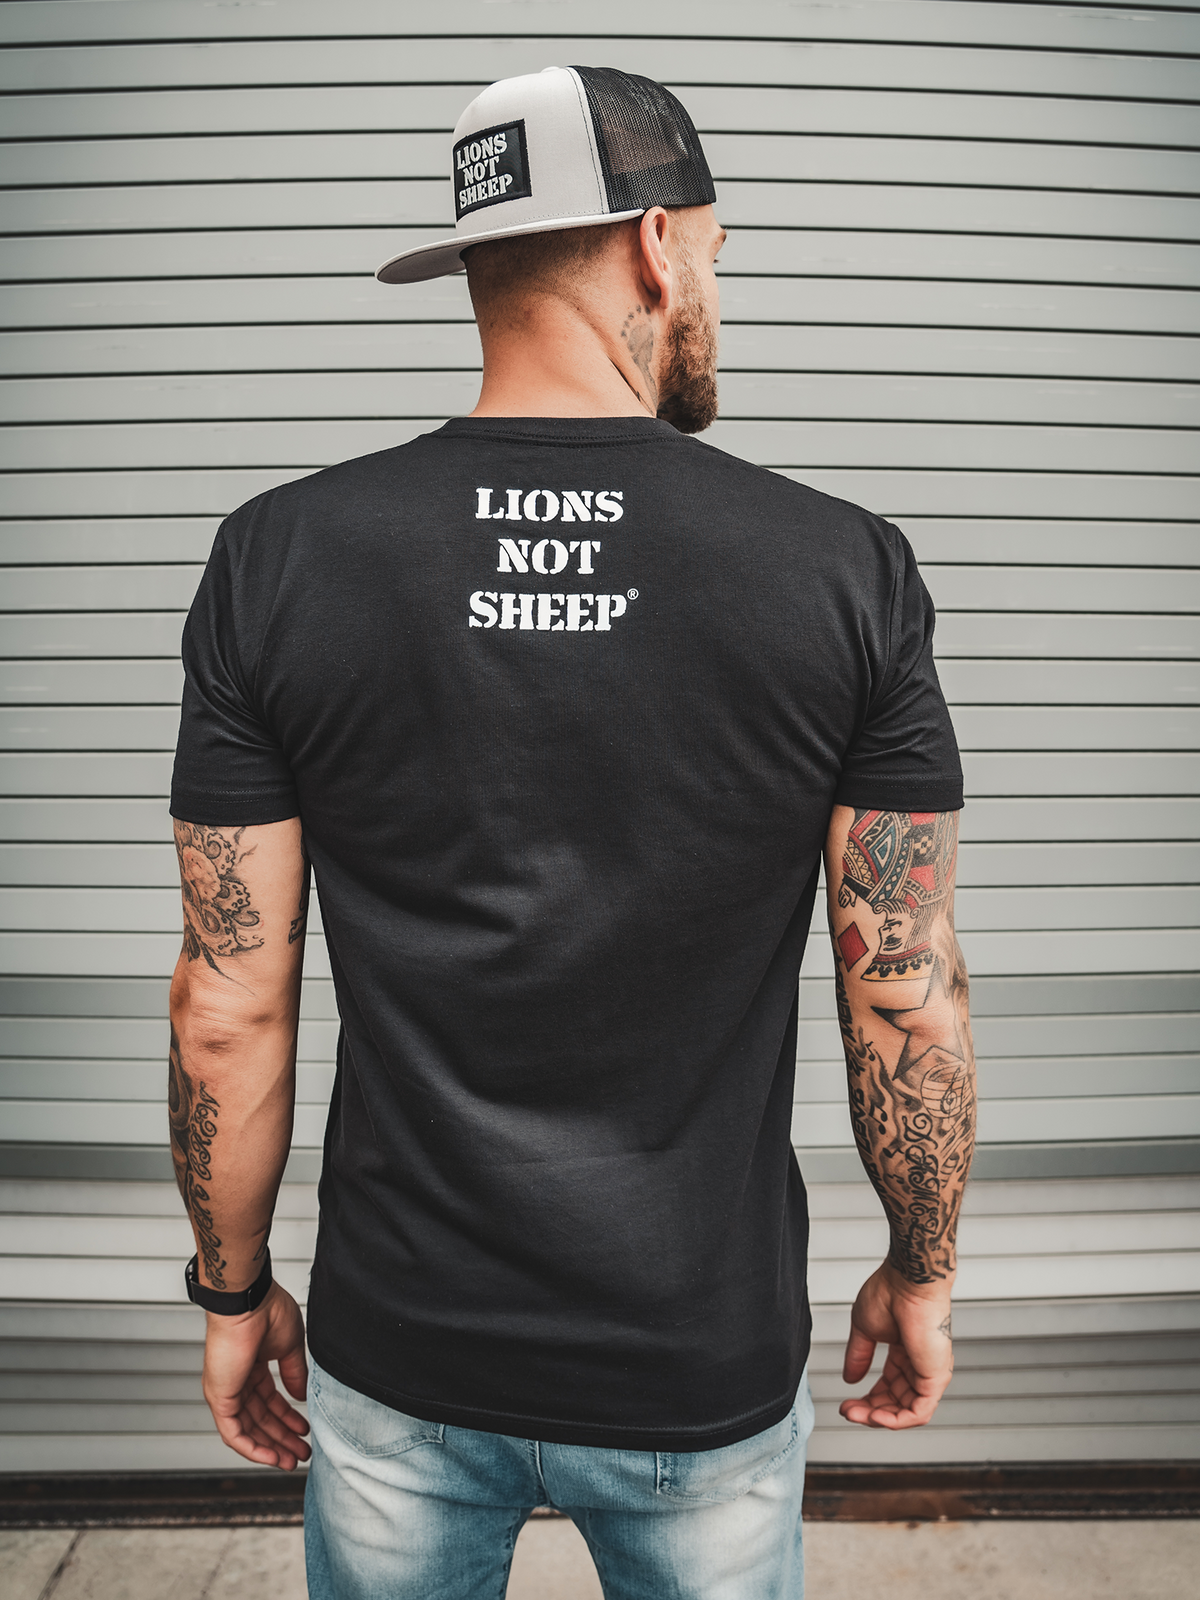 CREST SEAL Tee - Lions Not Sheep ®